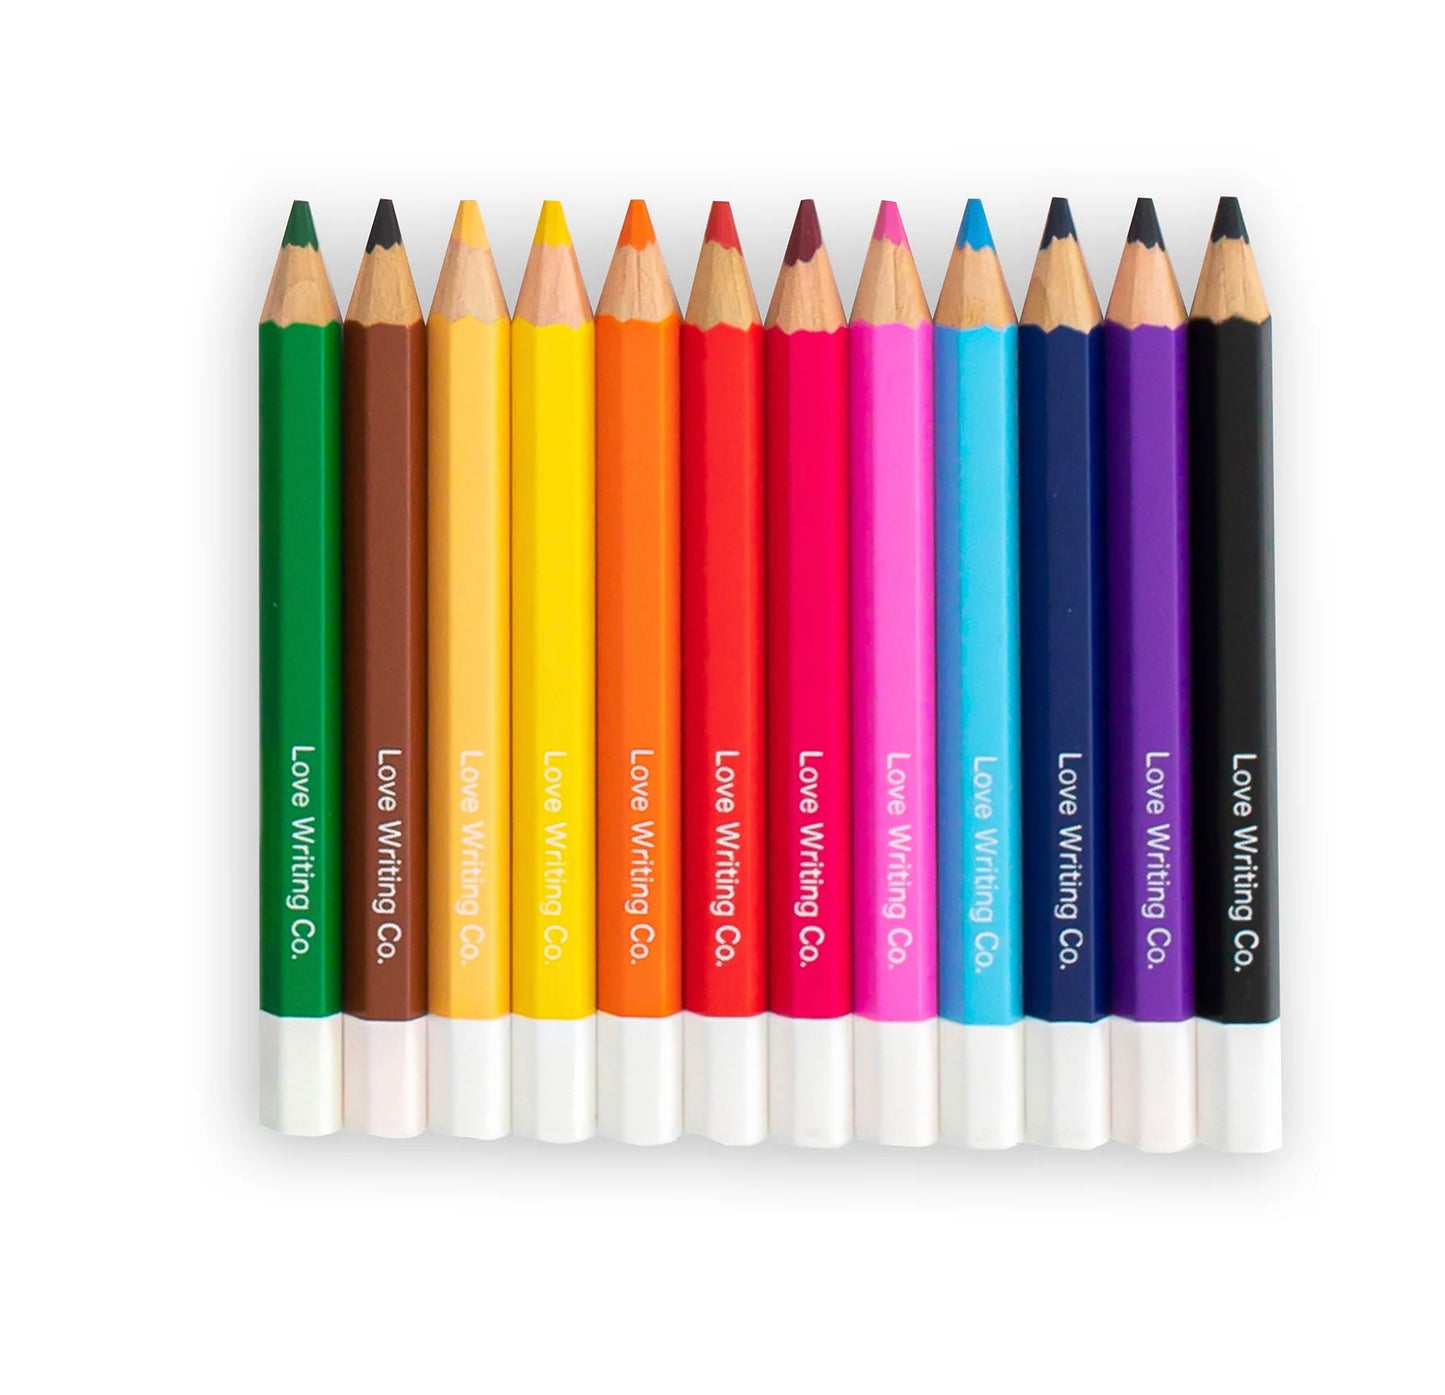 Love Writing Co. Tripod Grip erasable colouring pencils - Age 3-5 years